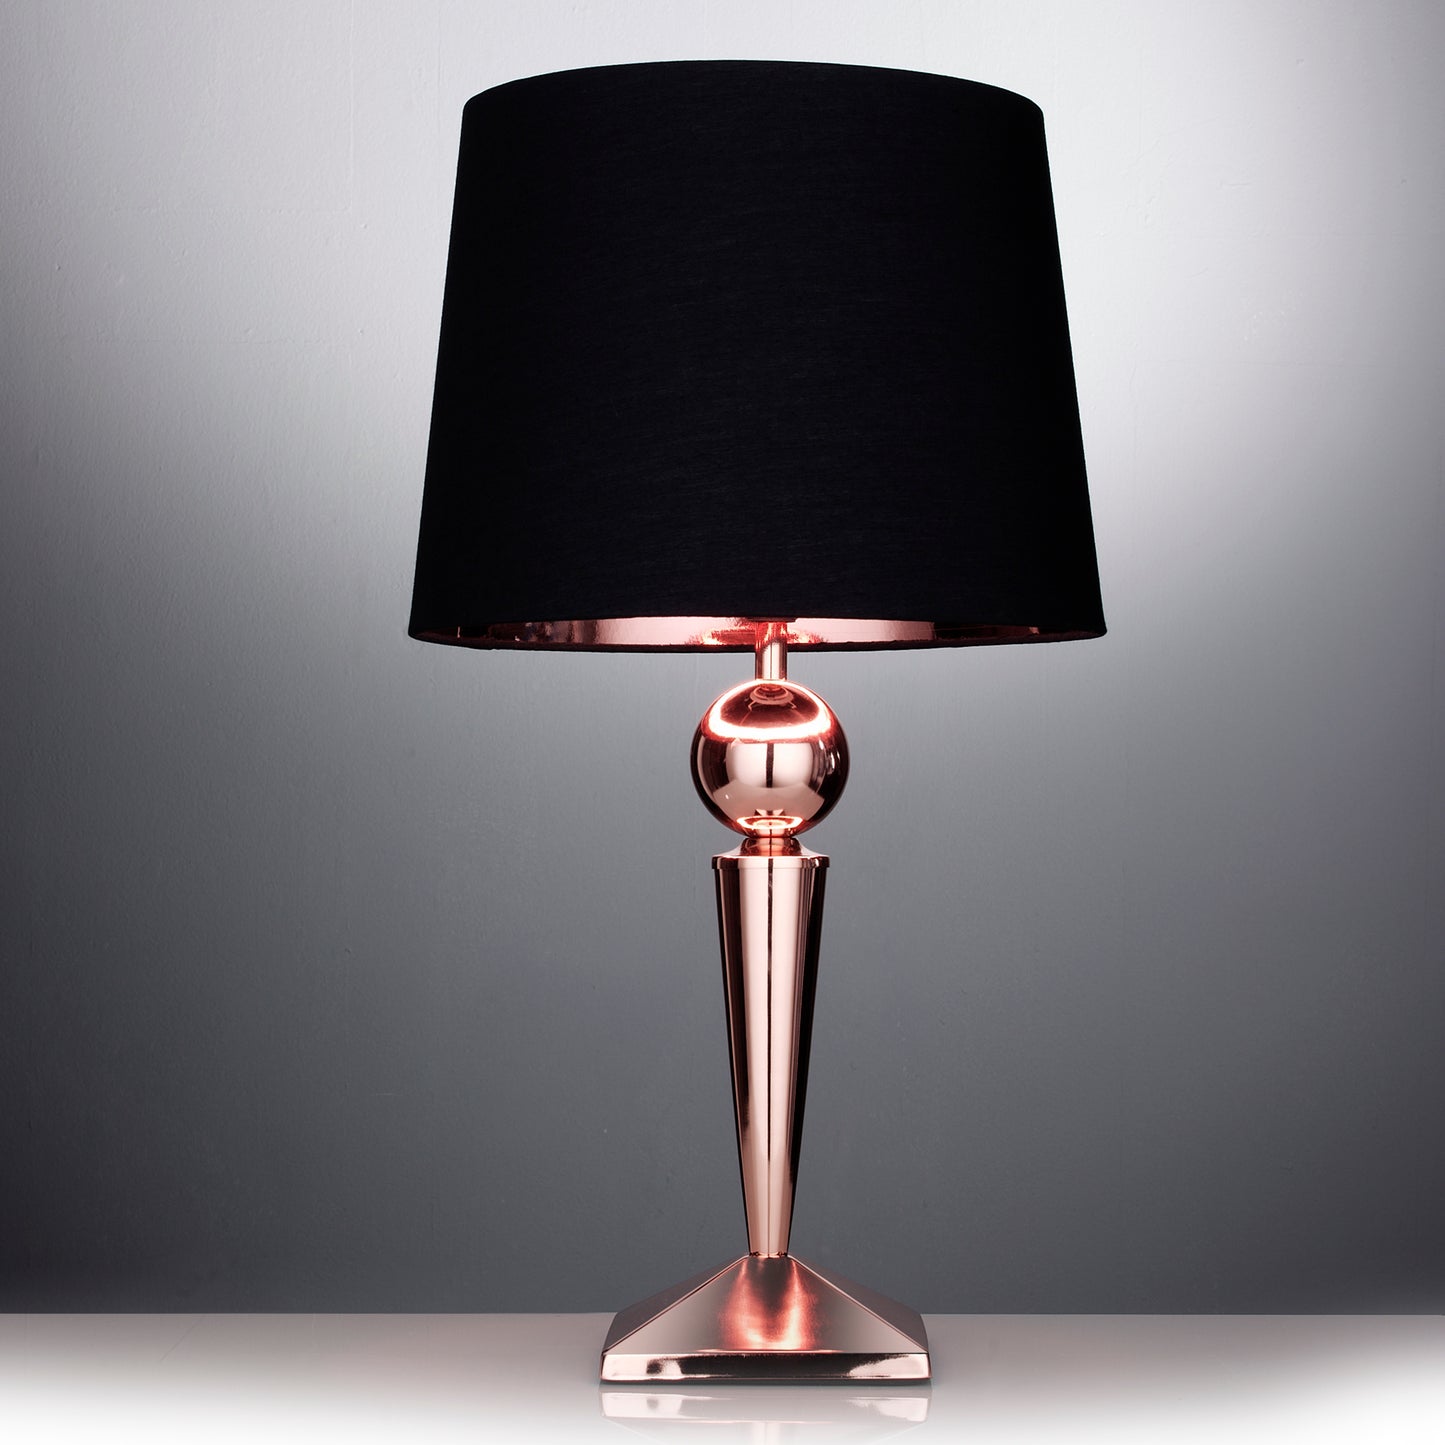 Table Lamp with Gold Stand and Black Shade with Internal Copper Lining